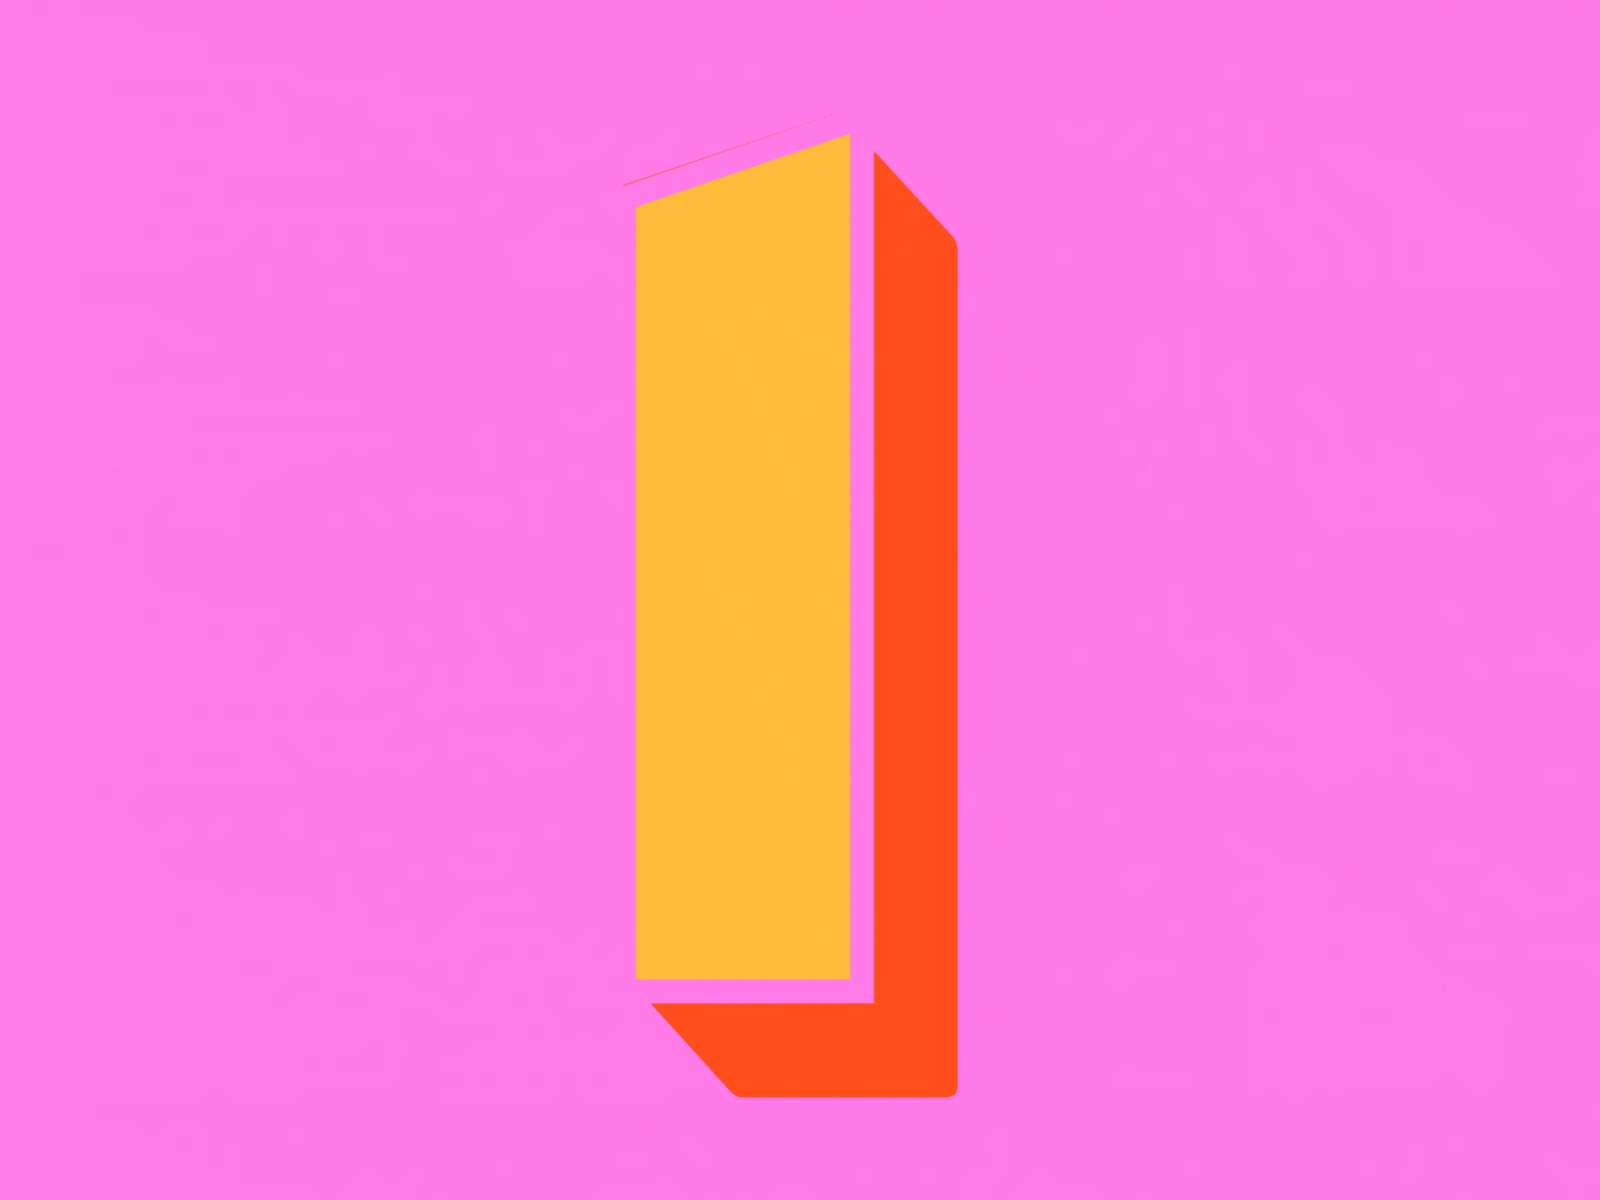 36 Days of Type / 1 36 days of type 36daysoftype 36daysoftype08 36dot ae after effects animated animated type animation animography colors design kinetic kinetic type motion motion design motion graphic motion graphics type typography